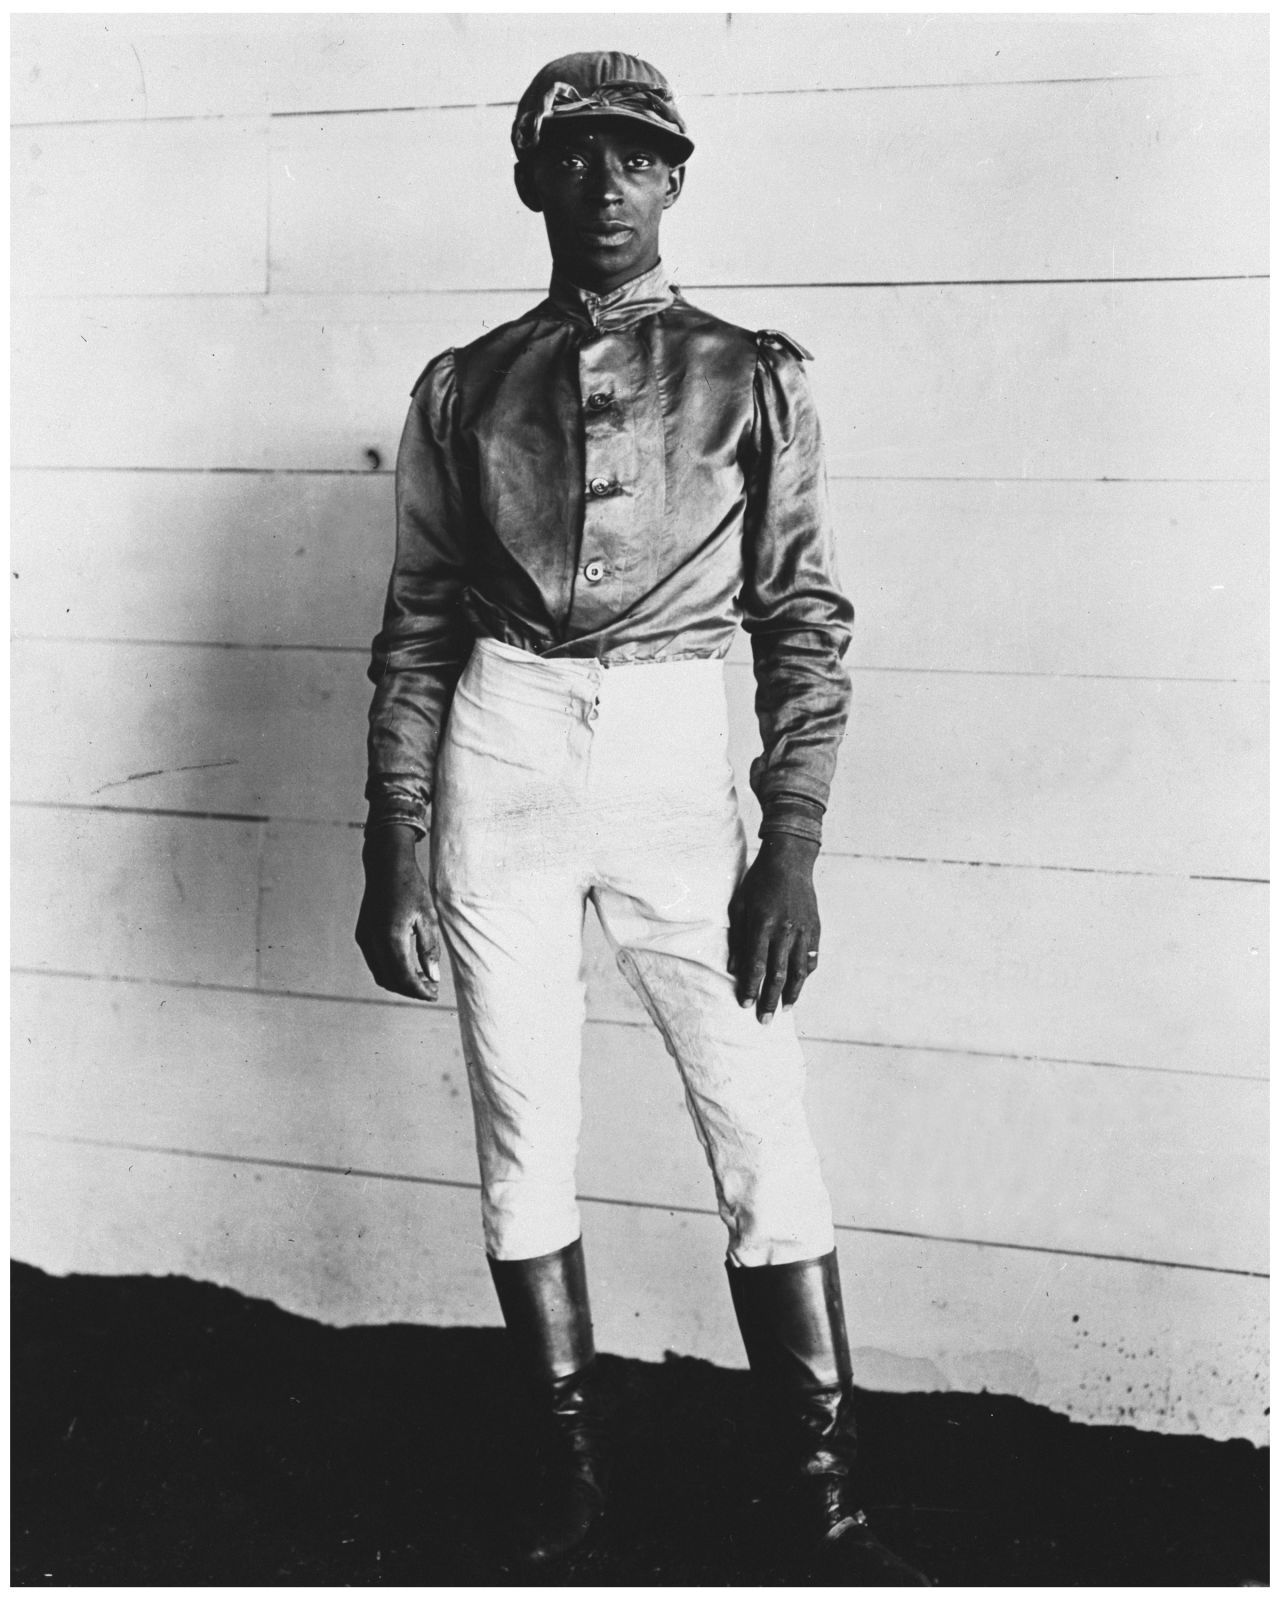 The first professional black American athletes were jockeys, who dominated the sport until the early 20th Century. Jimmy Winkfield (pictured) was the last black rider to win the Kentucky Derby in 1901 and 1902.